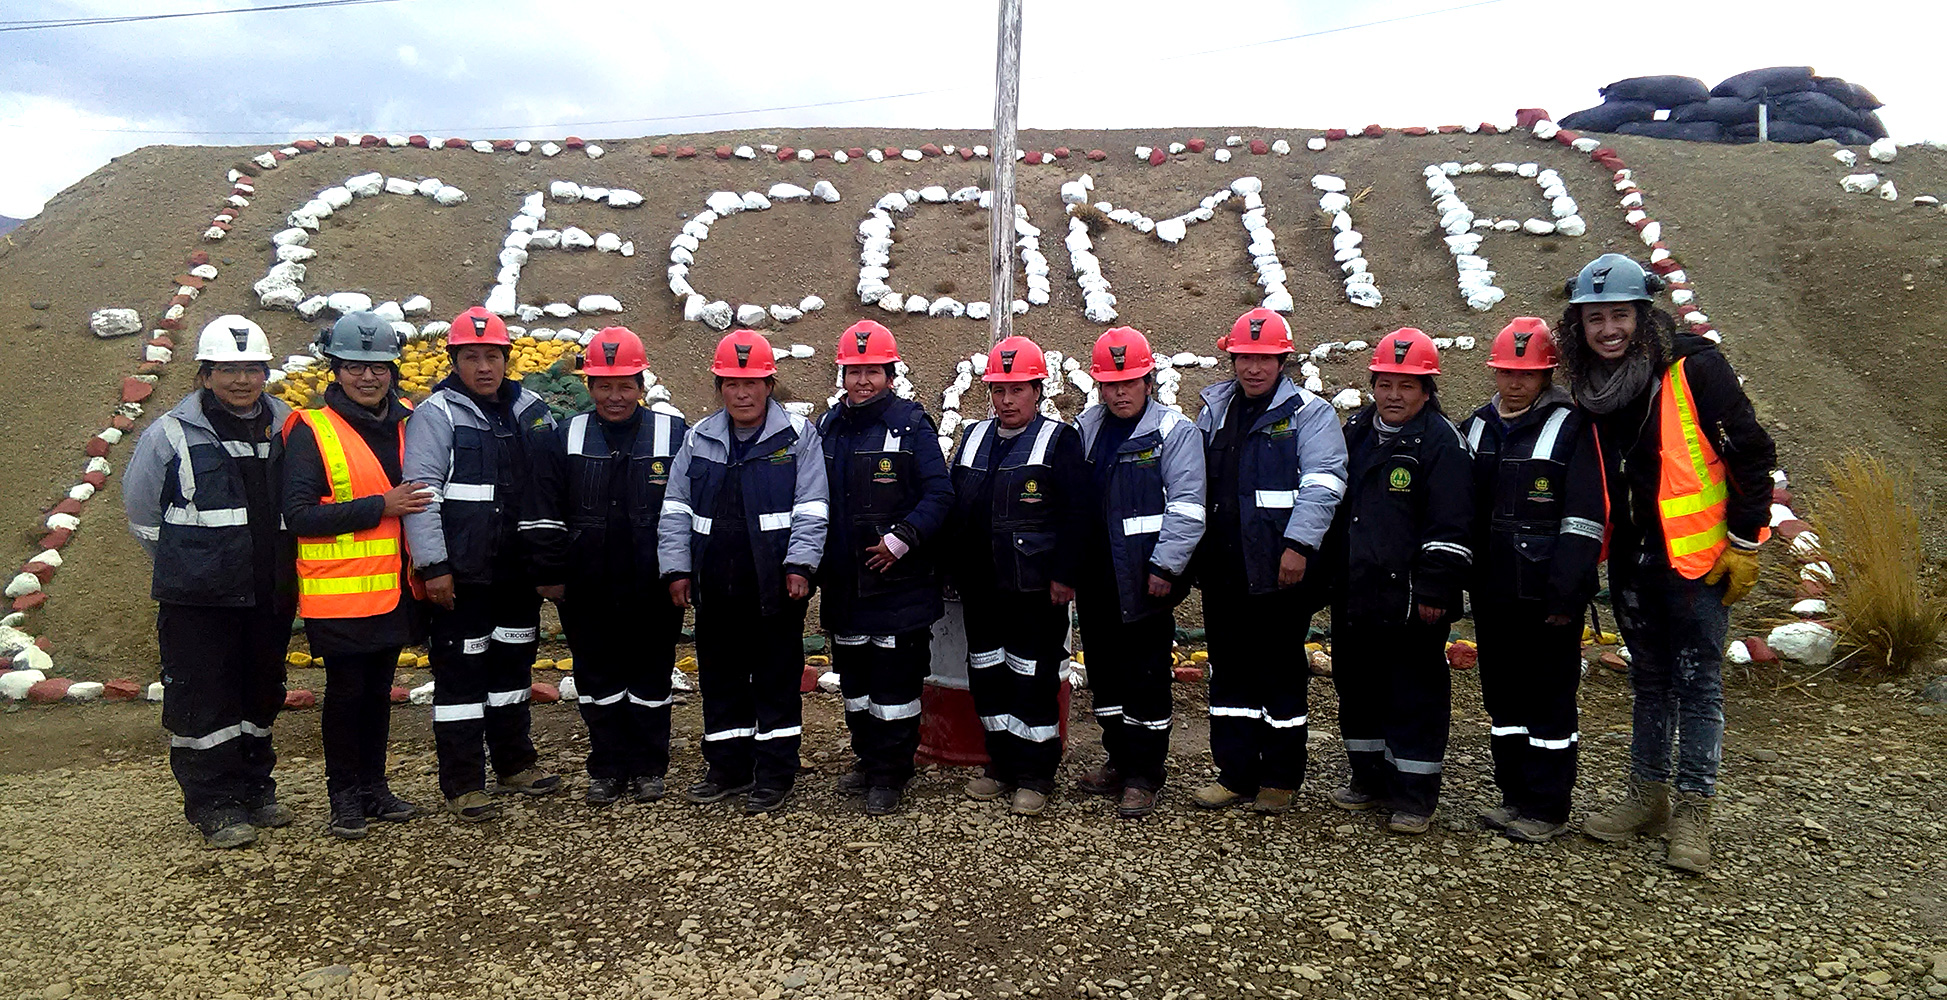 12 miners in safety uniforms standing in front of a hillside with a sign made of rocks spelling out 'CiECOMIP,'